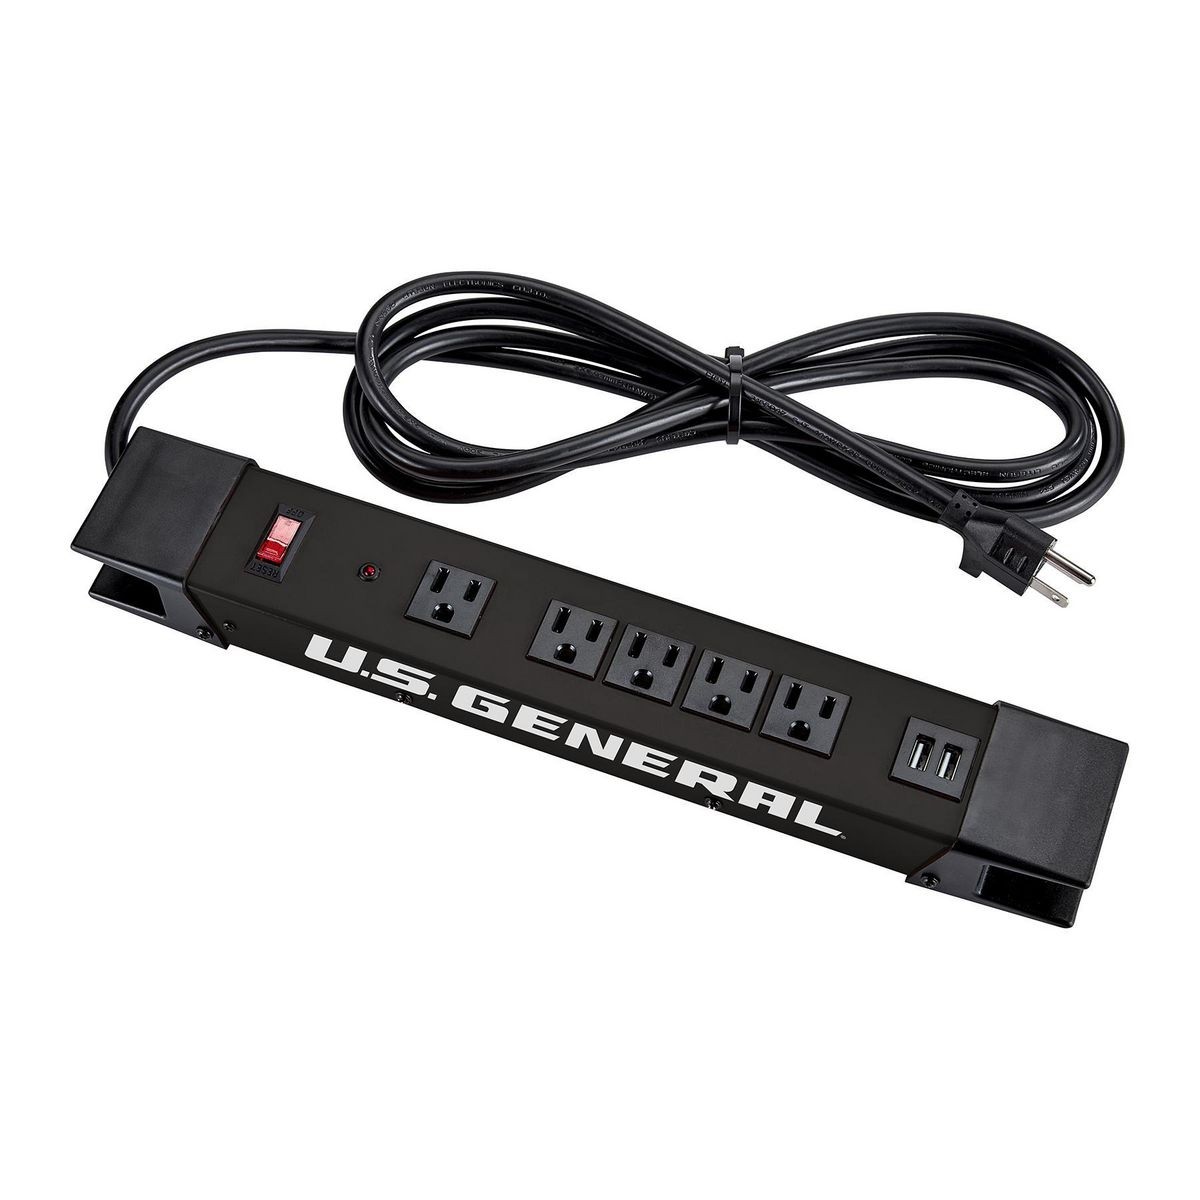 U.S. GENERAL 5 Outlet Magnetic Power Strip With Metal Housing And 2 USB Ports – Black – Item 64798